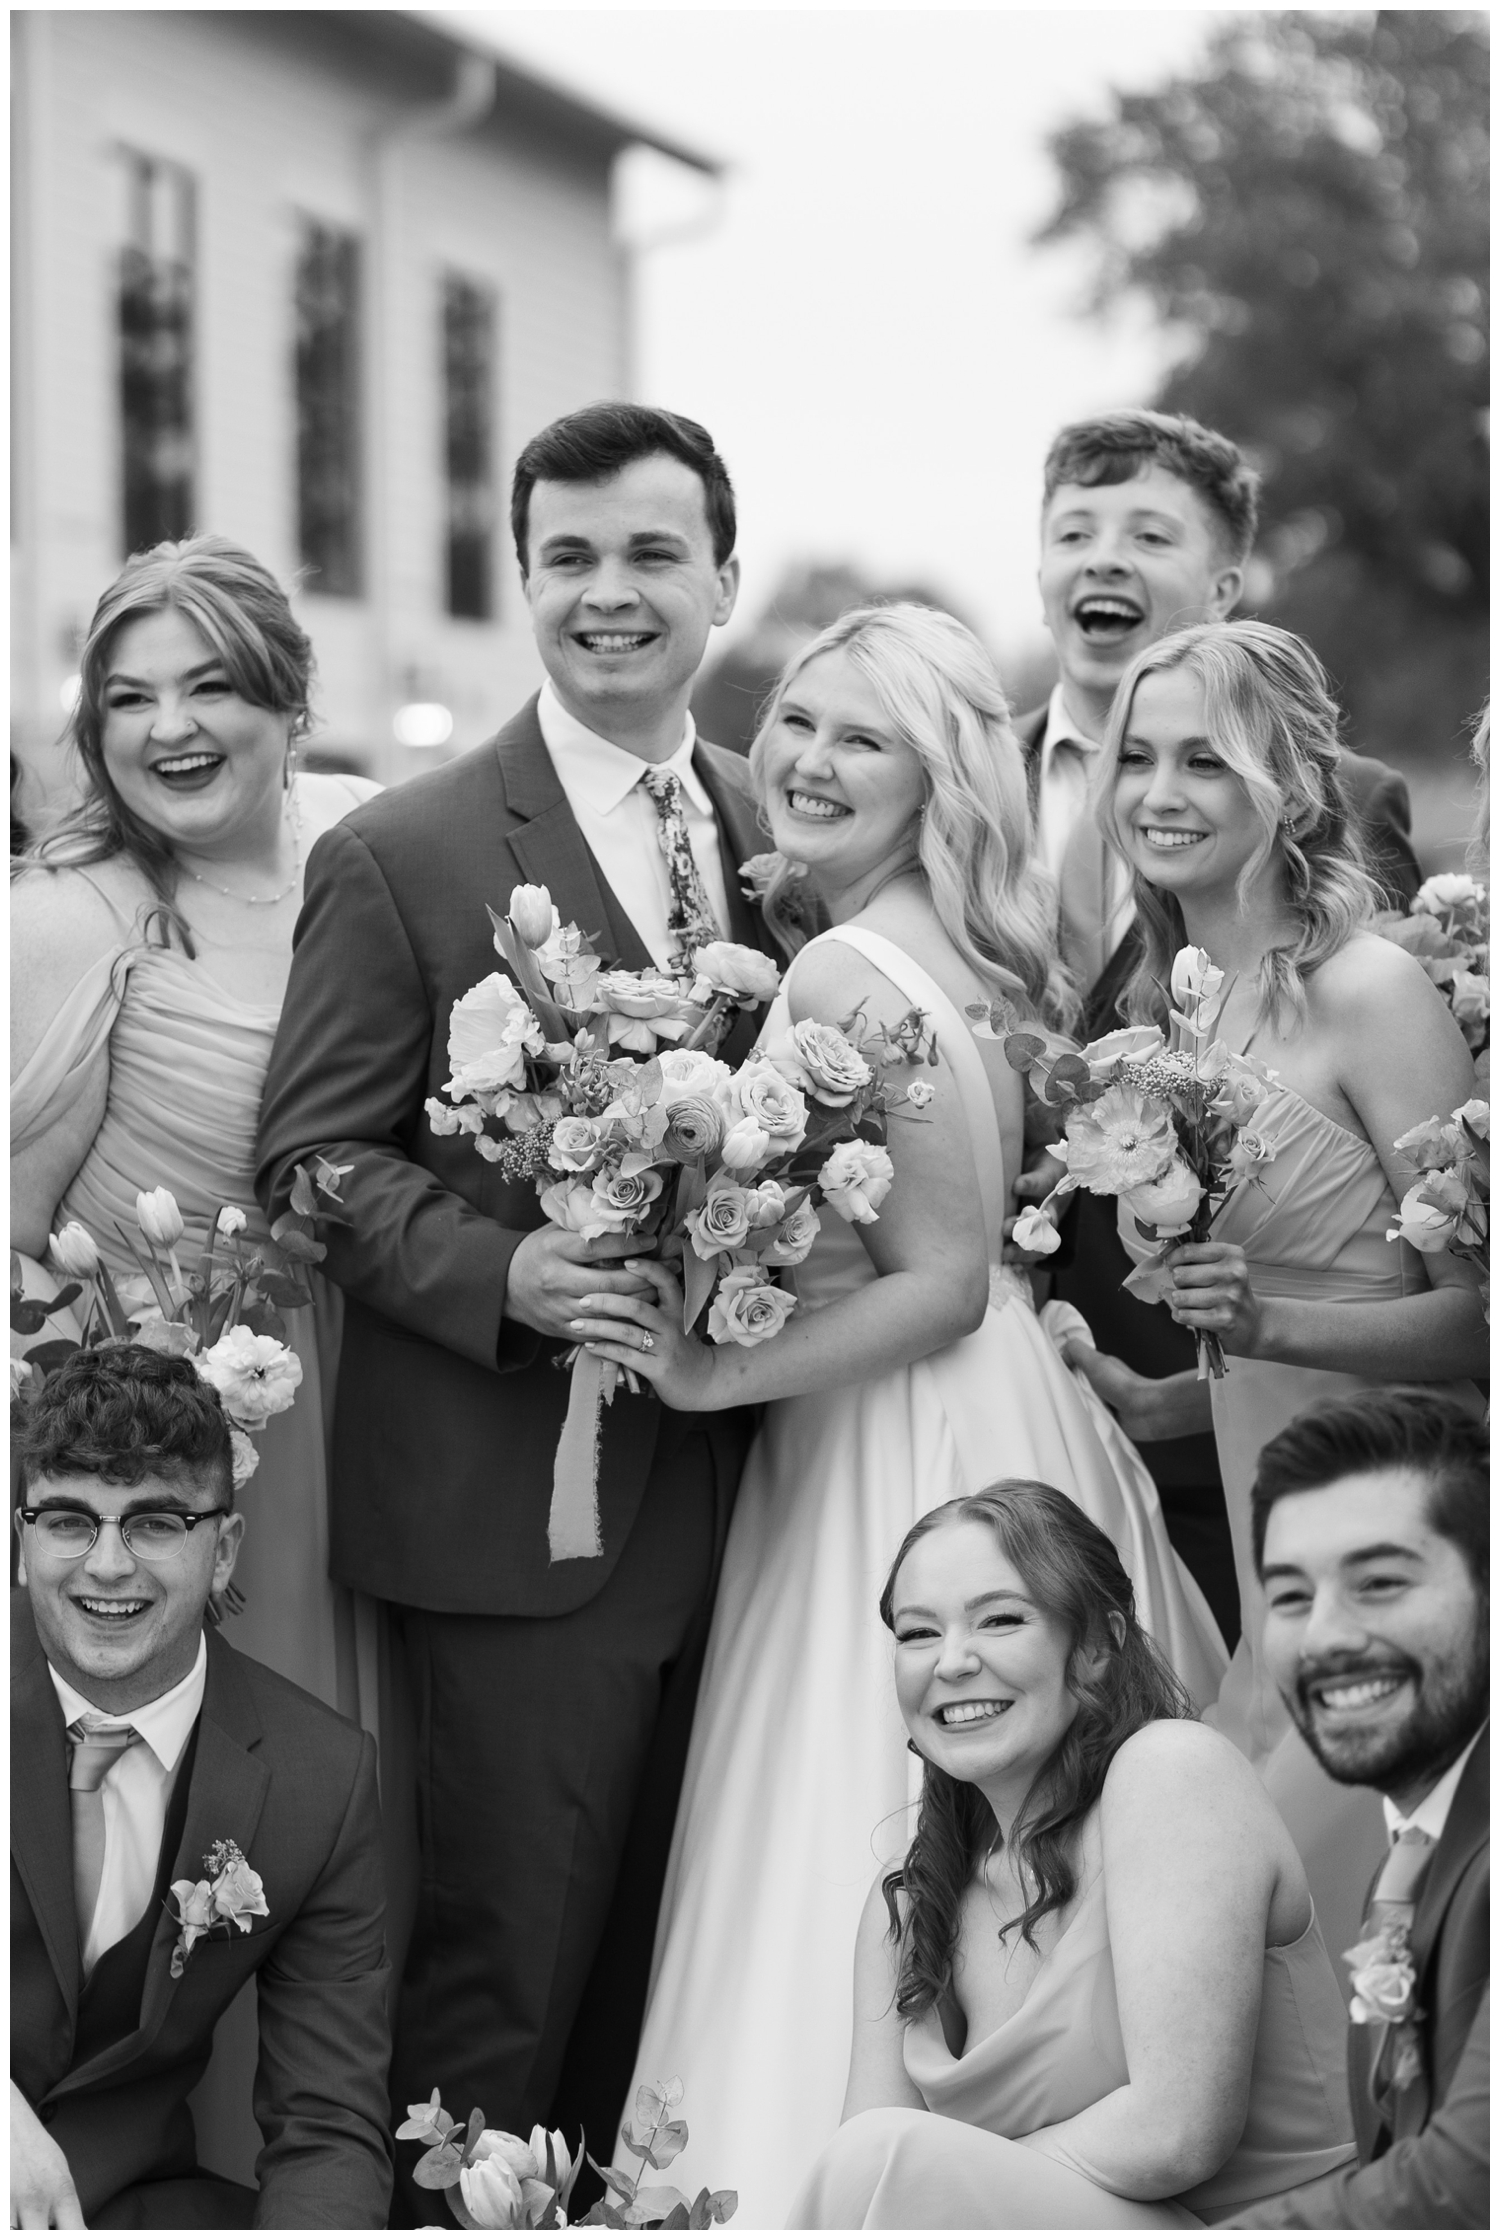 black and white image of bridal party outdoors smiling